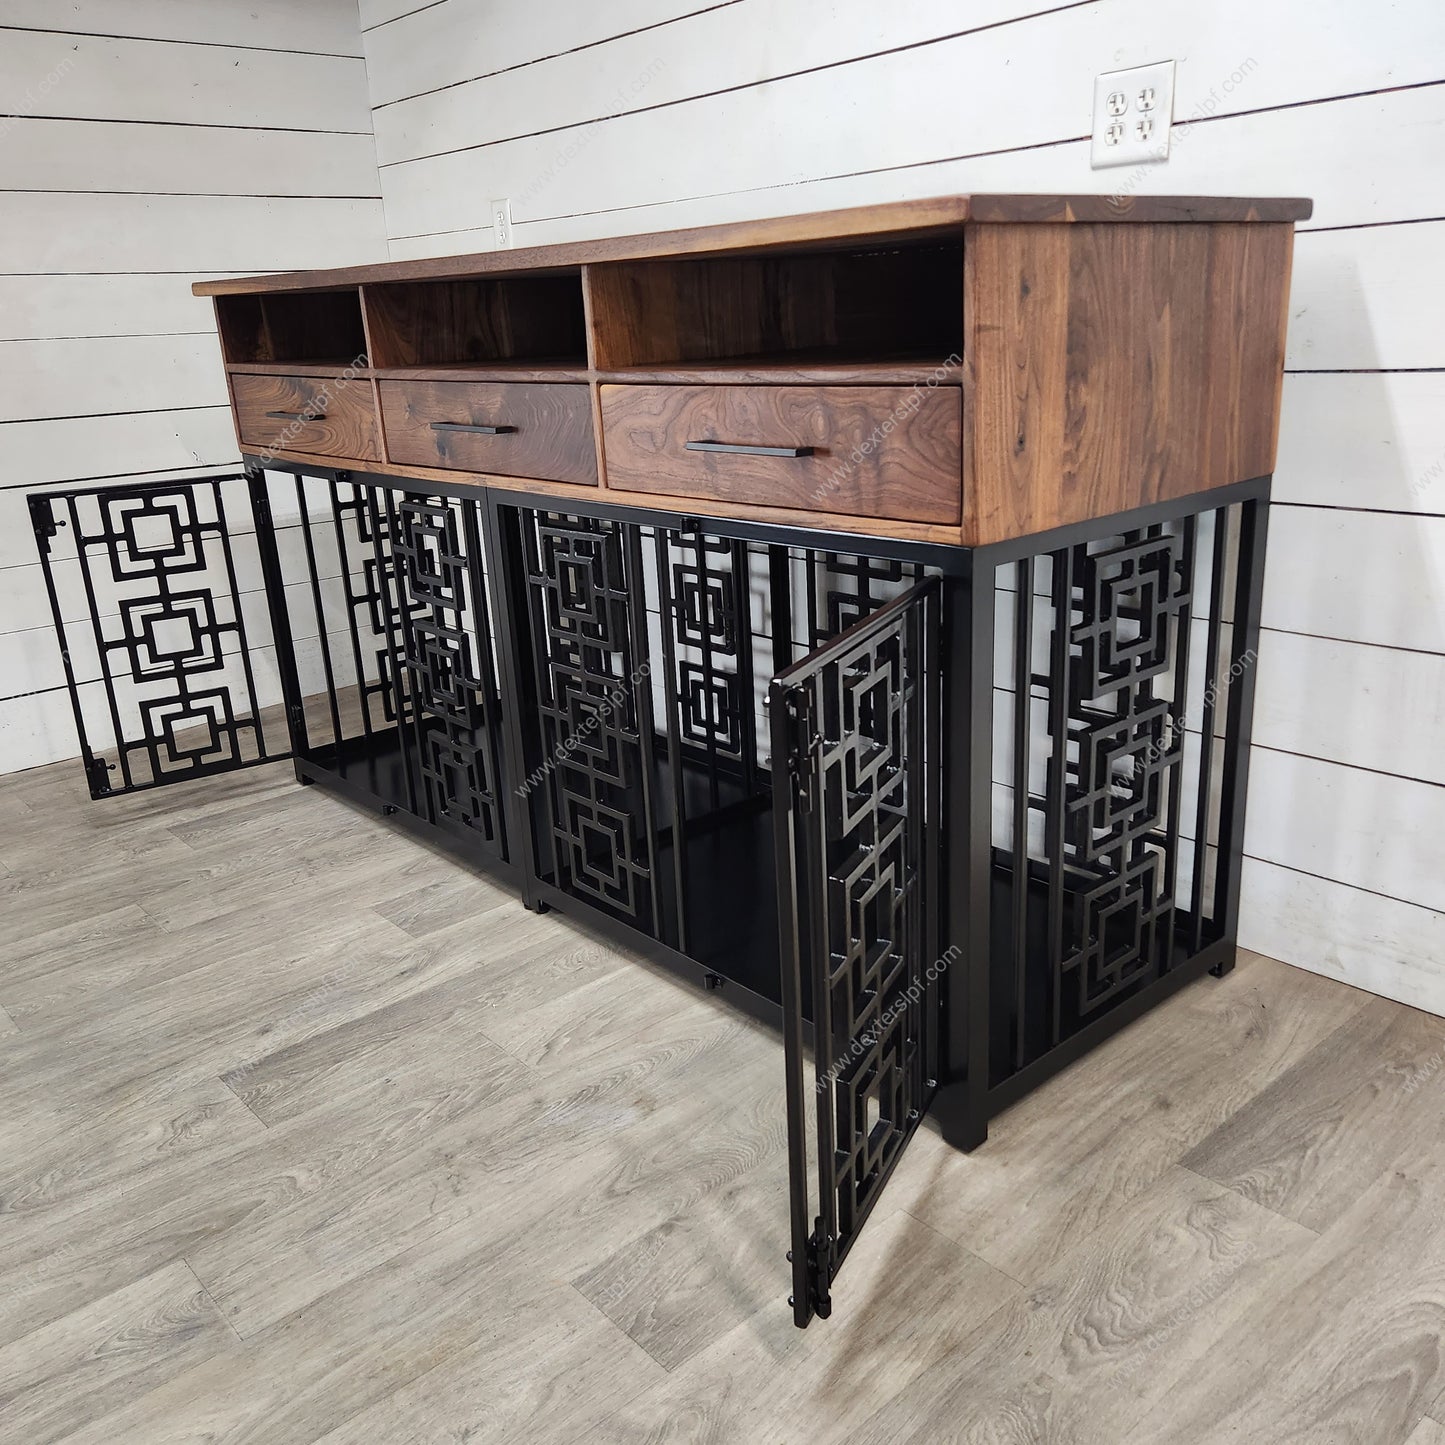 Sebby Large Double with Media Shelves & Drawers, Large Double Dog Crate, Dog Crate Furniture, Dog Kennel Furniture, Dog Crate